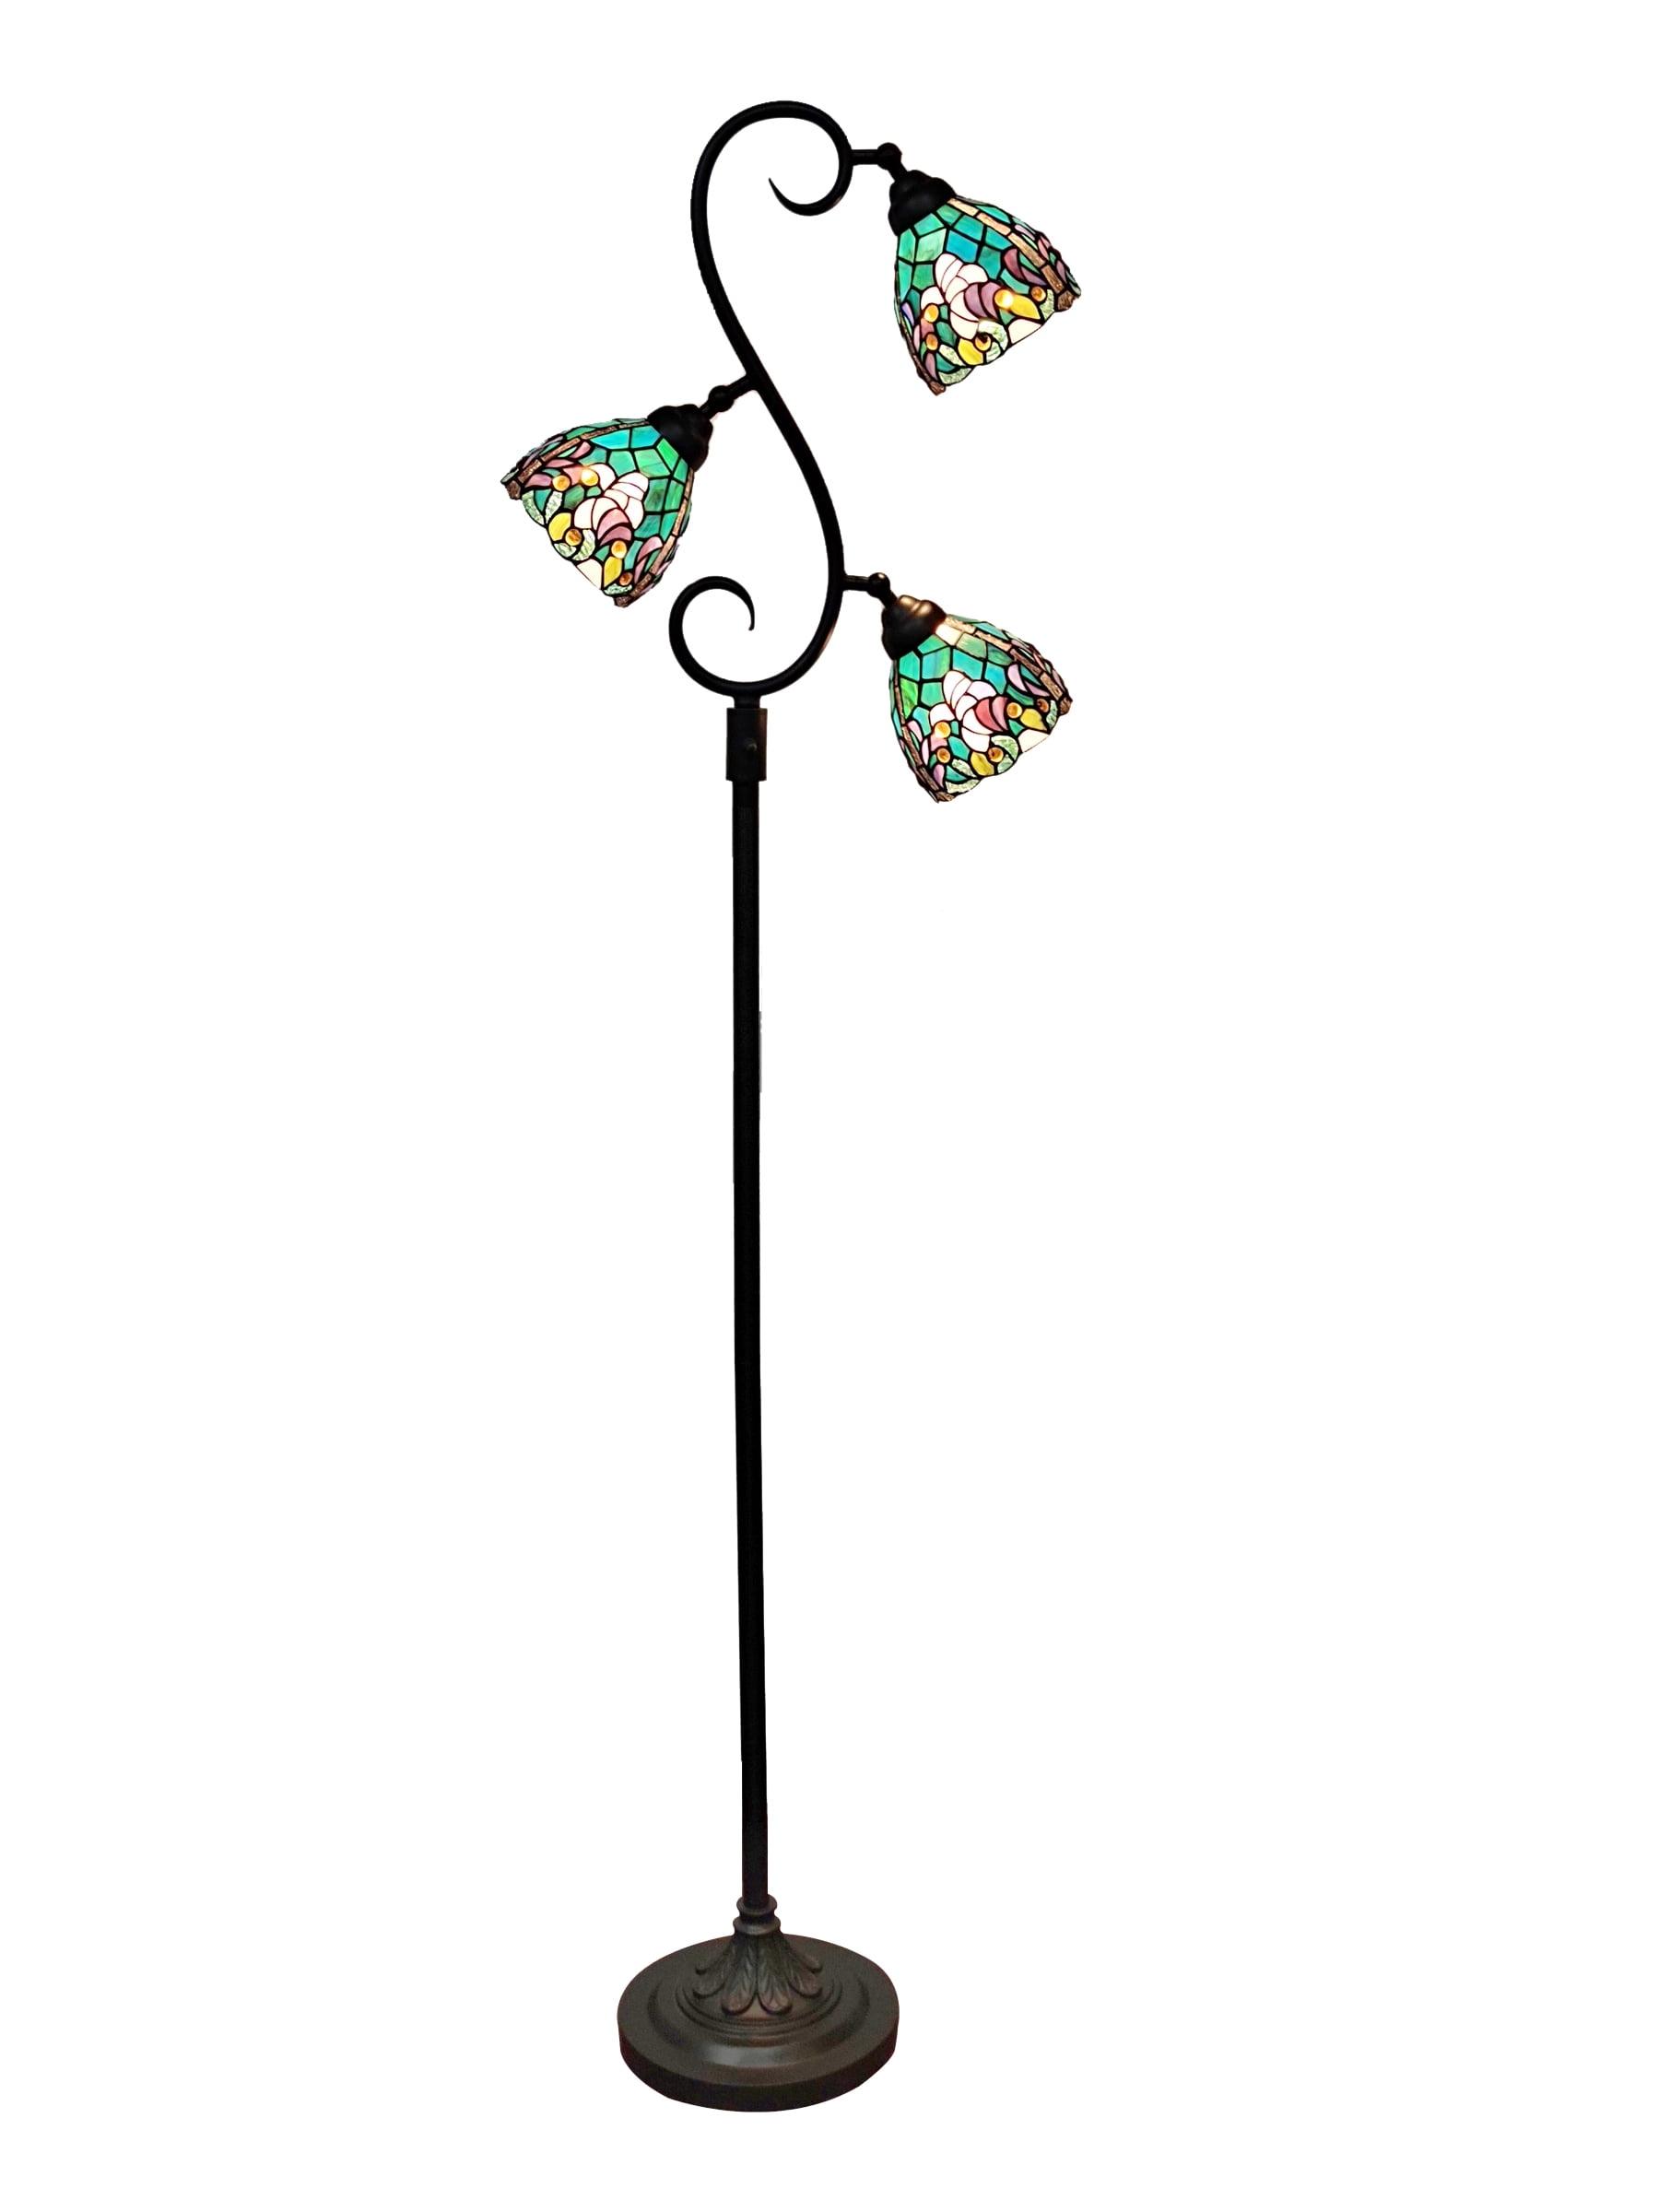 Alassio Teal and Bronze 72.5" Stained Glass Torchiere Floor Lamp